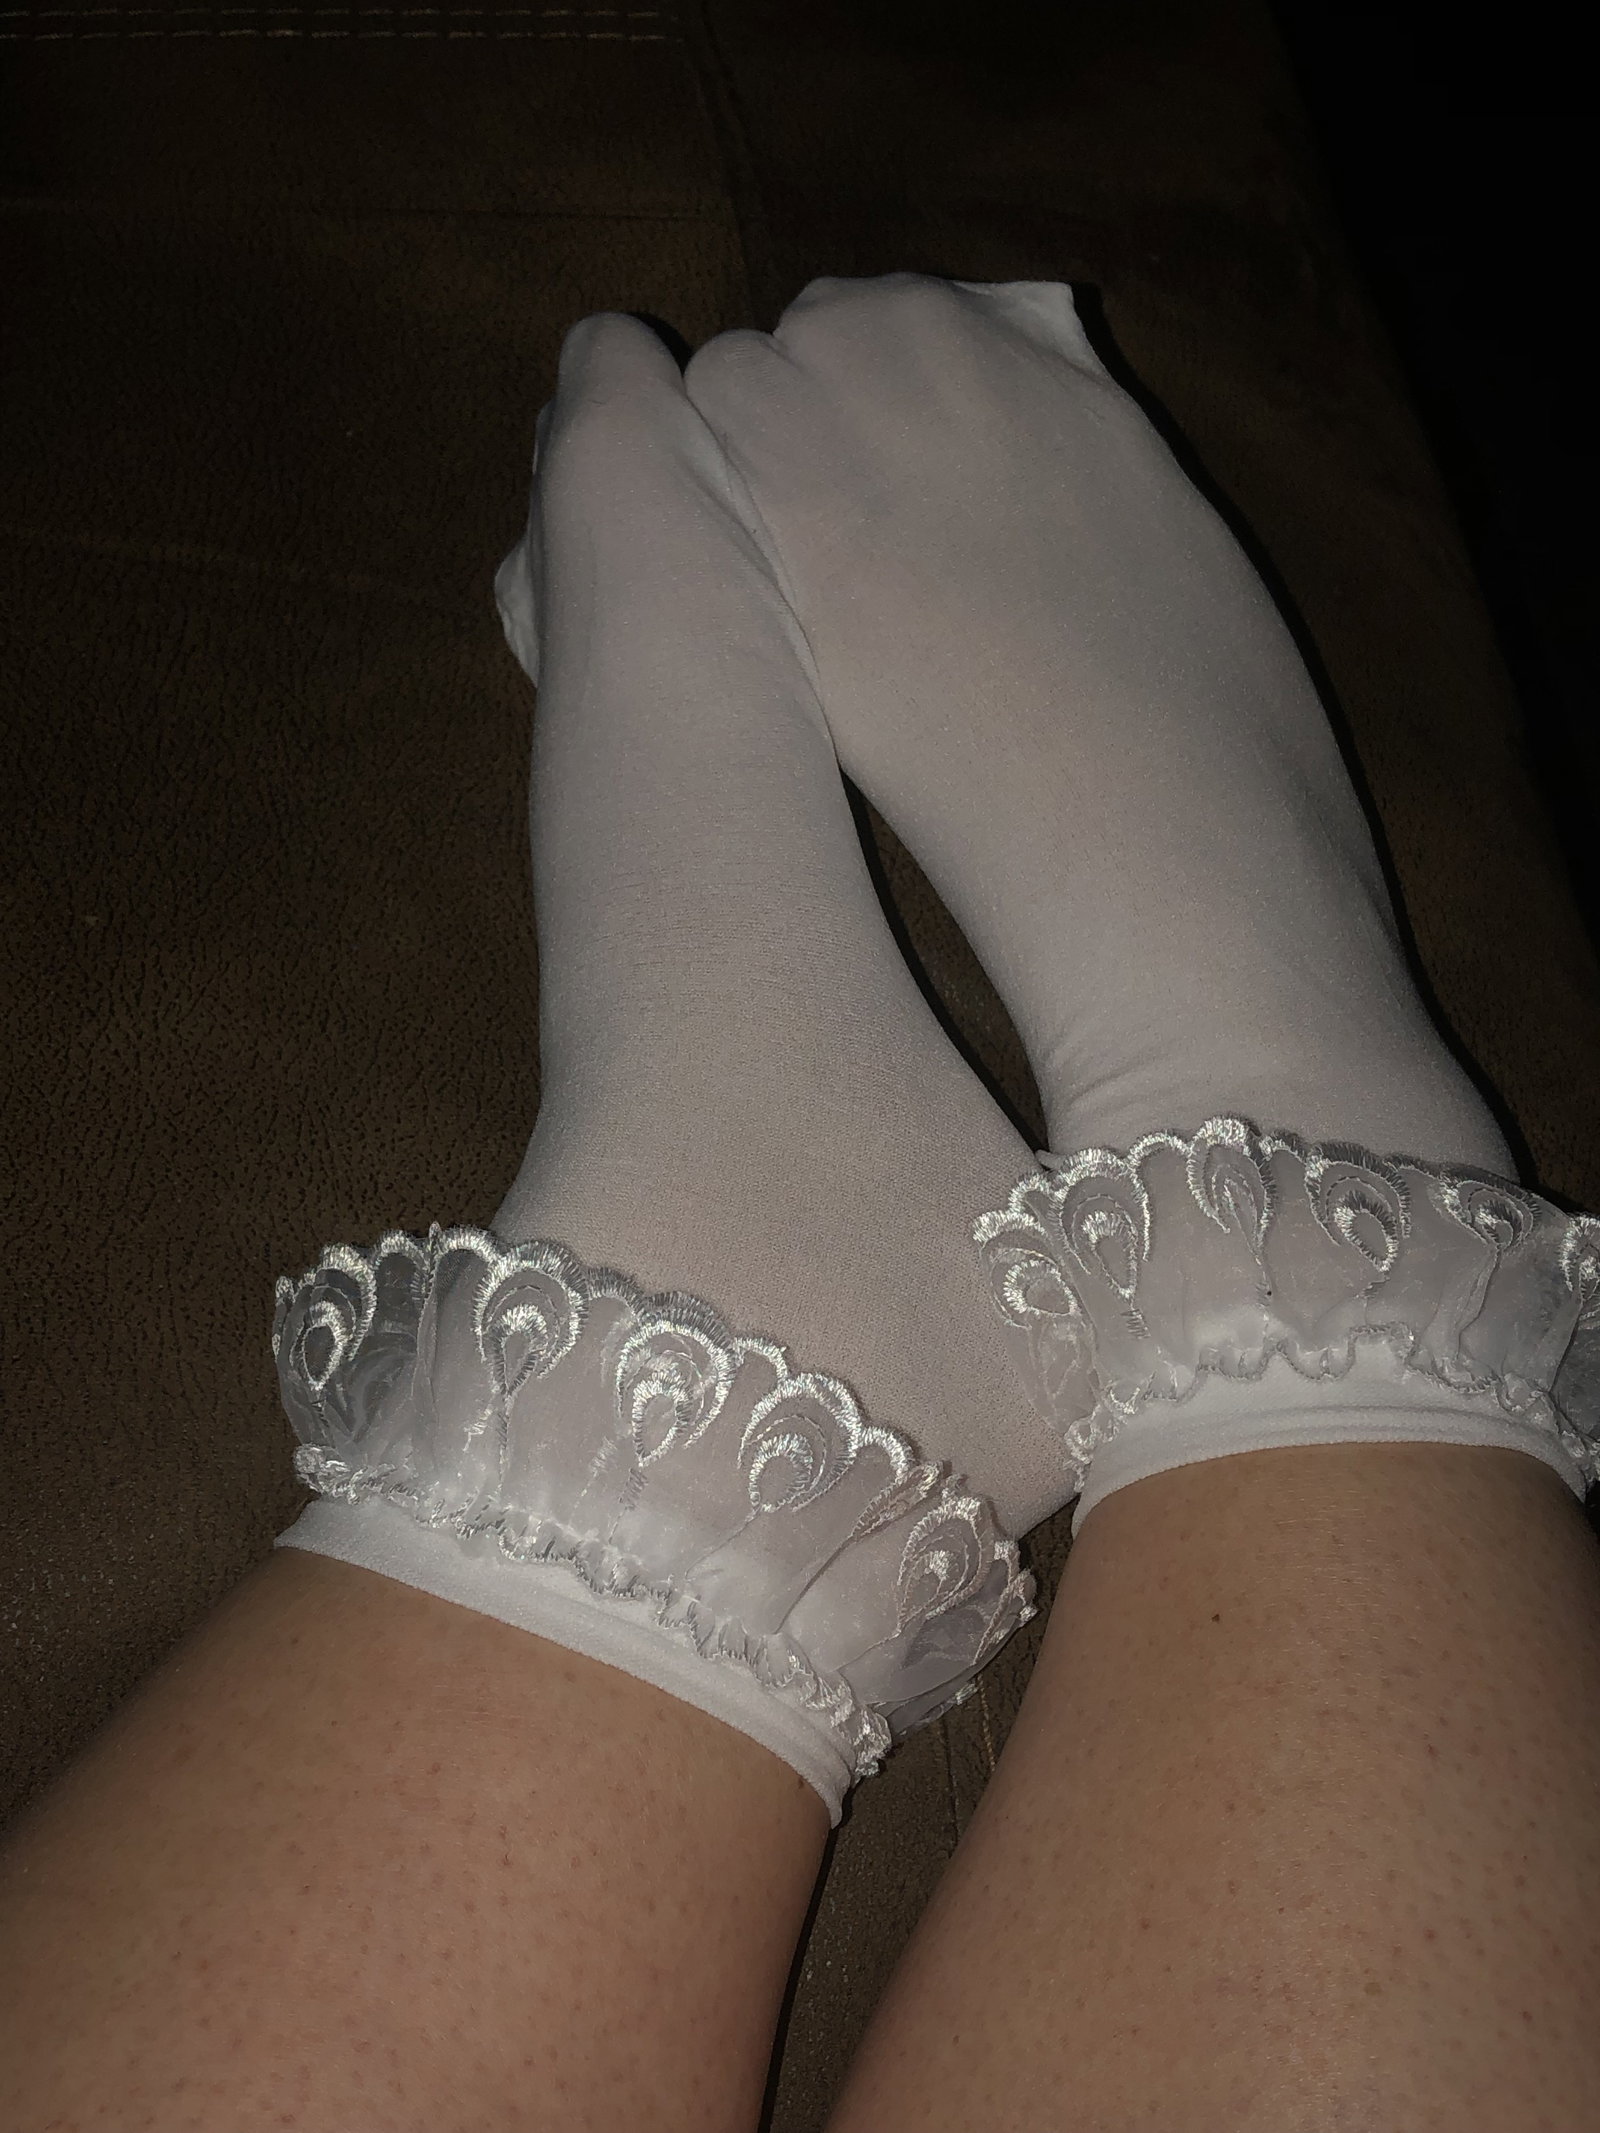 Watch the Photo by IrishMermaid with the username @IrishMermaid, posted on July 26, 2019. The post is about the topic Sexy Feet.